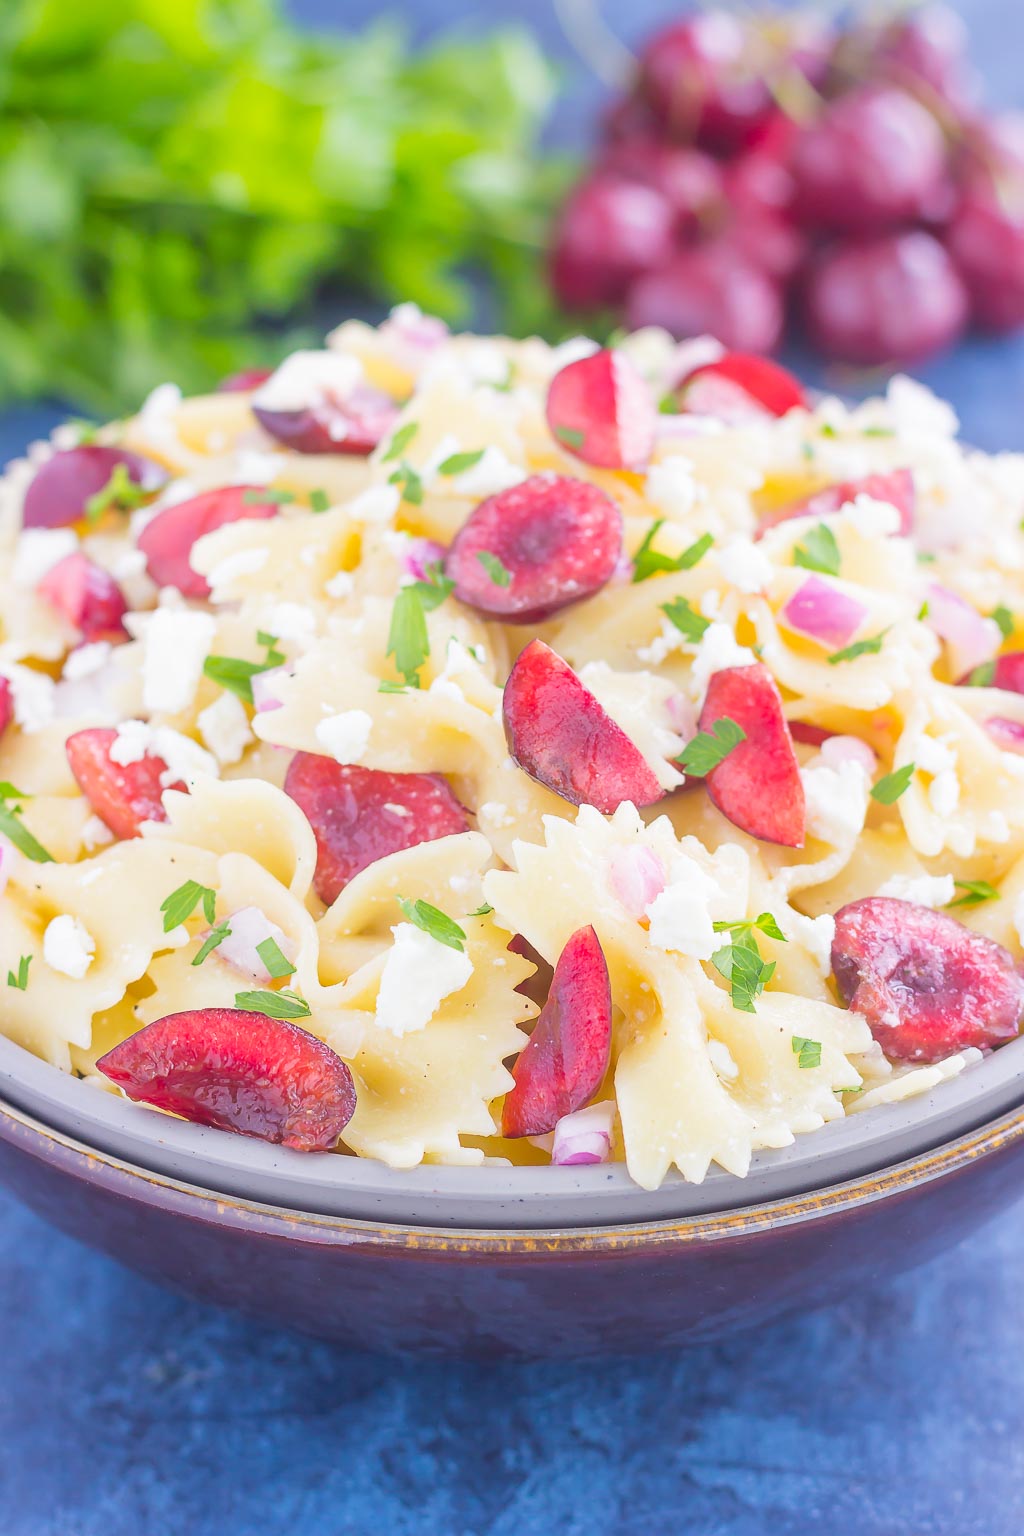 This Cherry Balsamic Pasta Salad is packed with fresh cherries, red onion, and feta cheese, all topped with a light white balsamic dressing. Easy to make and bursting with flavor, this salad is the perfect summer dish to enjoy all season long!